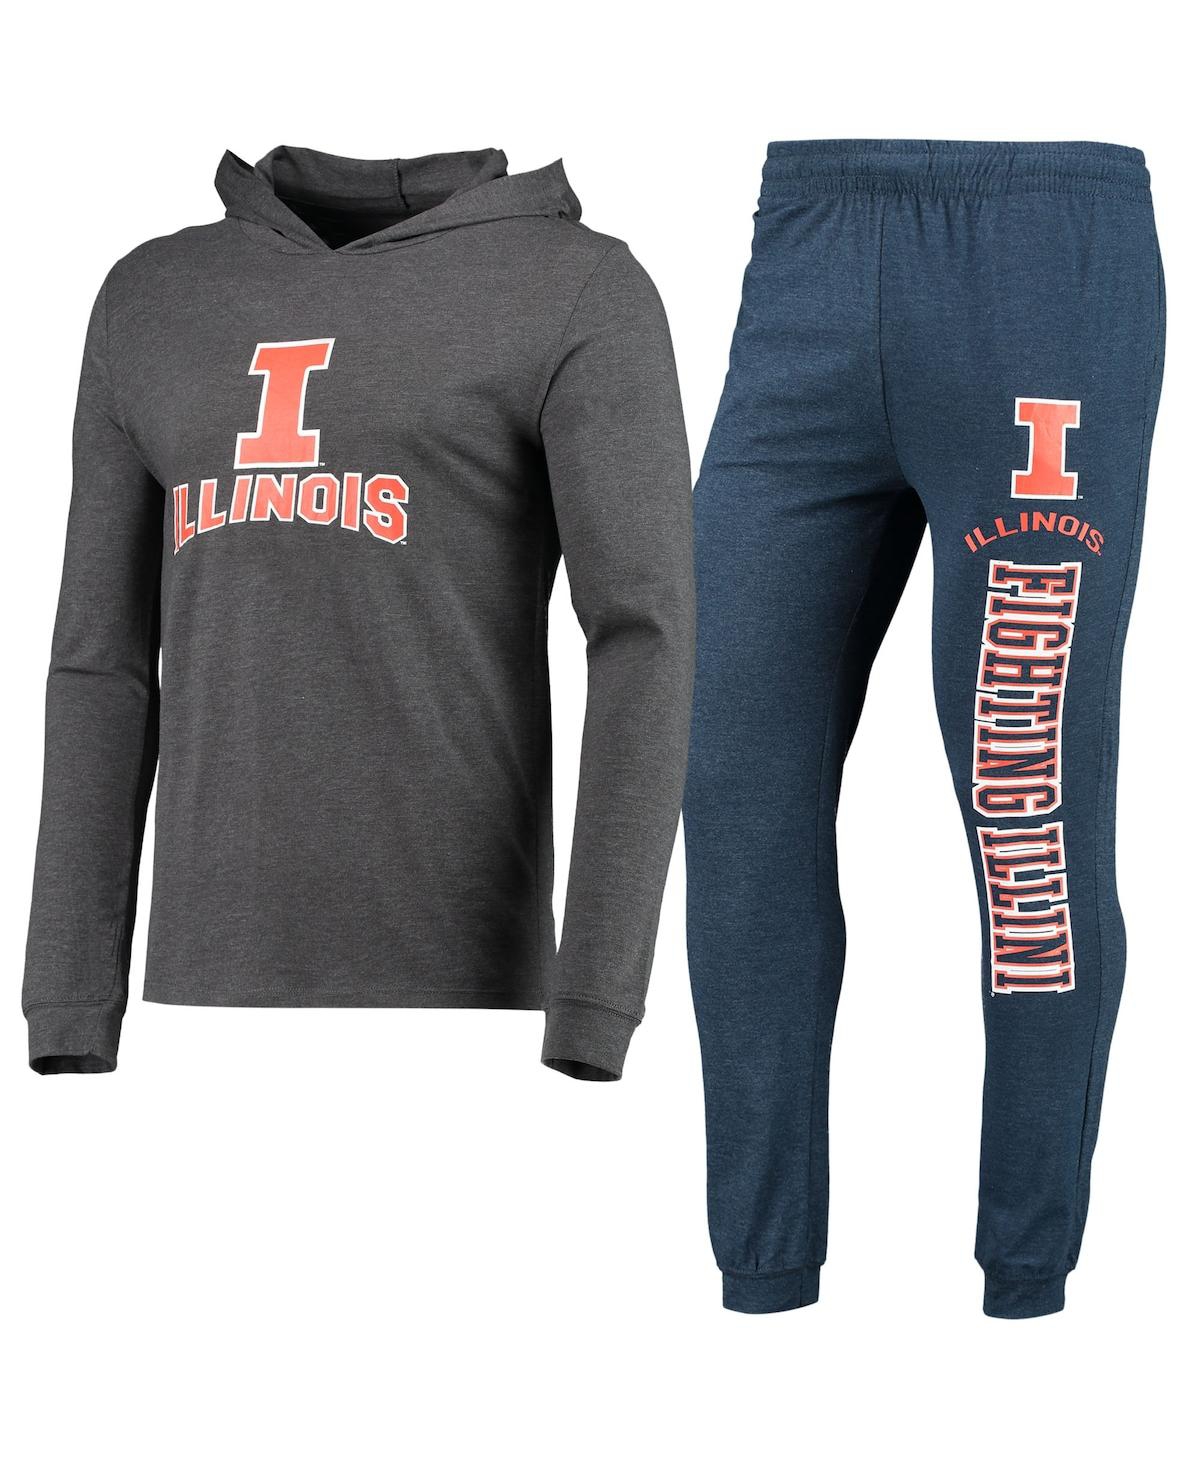 Men's Concepts Sport Heathered Navy, Heathered Charcoal Illinois Fighting Illini Meter Long Sleeve Hoodie T-shirt and Jogger Pants Set - Navy, Heather